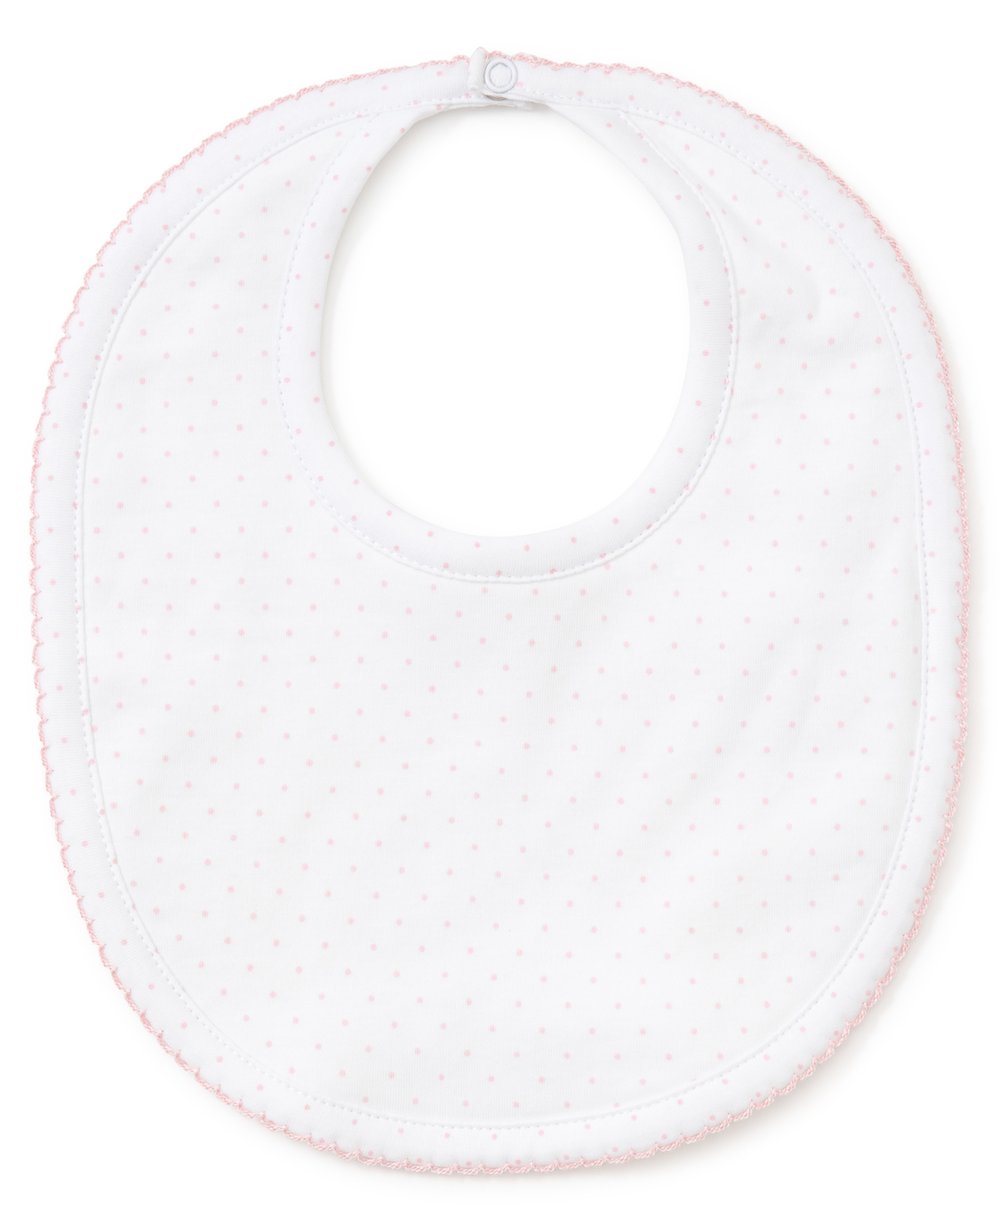 New Dots White With Pink Bib